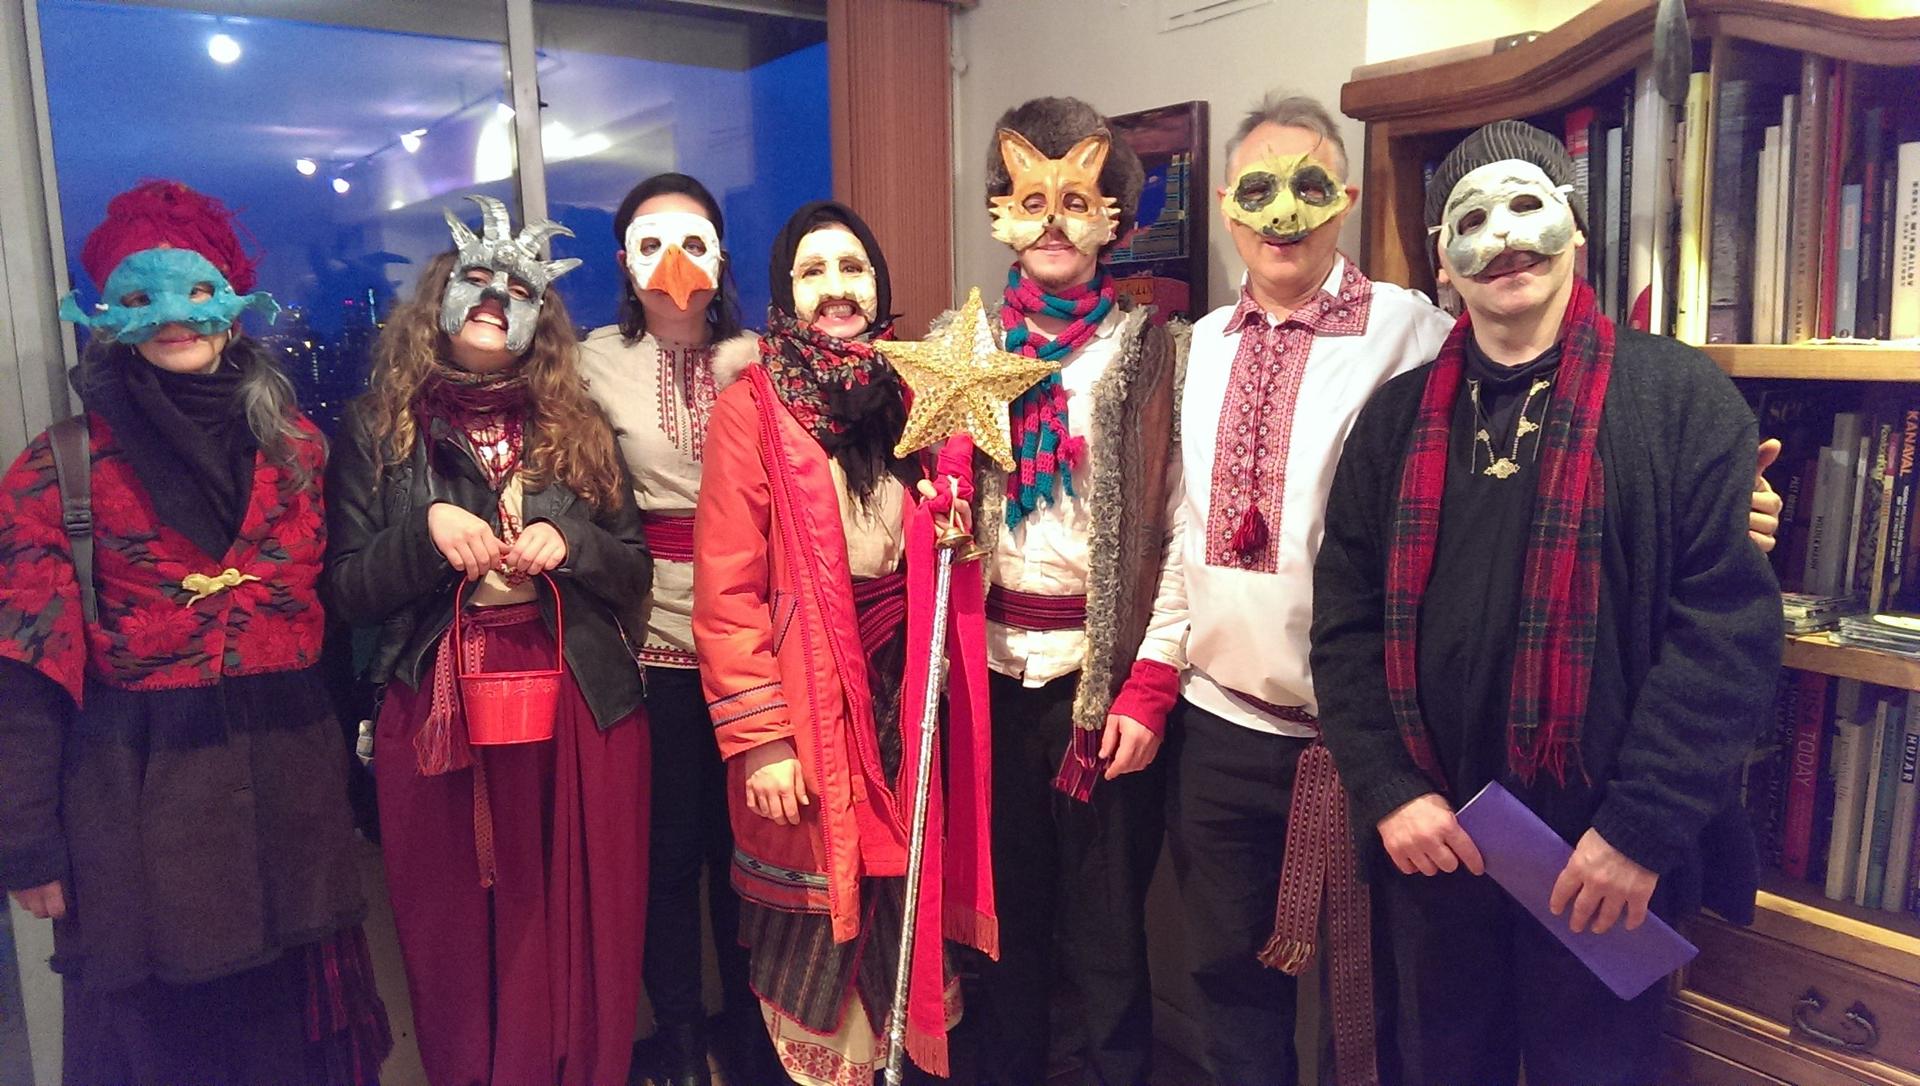 Brian Dolphin (in fox mask) and his music group Ukrainian Village Voices. The group went caroling door to door to celebrate Koliada, an ancient pagan tradition in Ukraine.